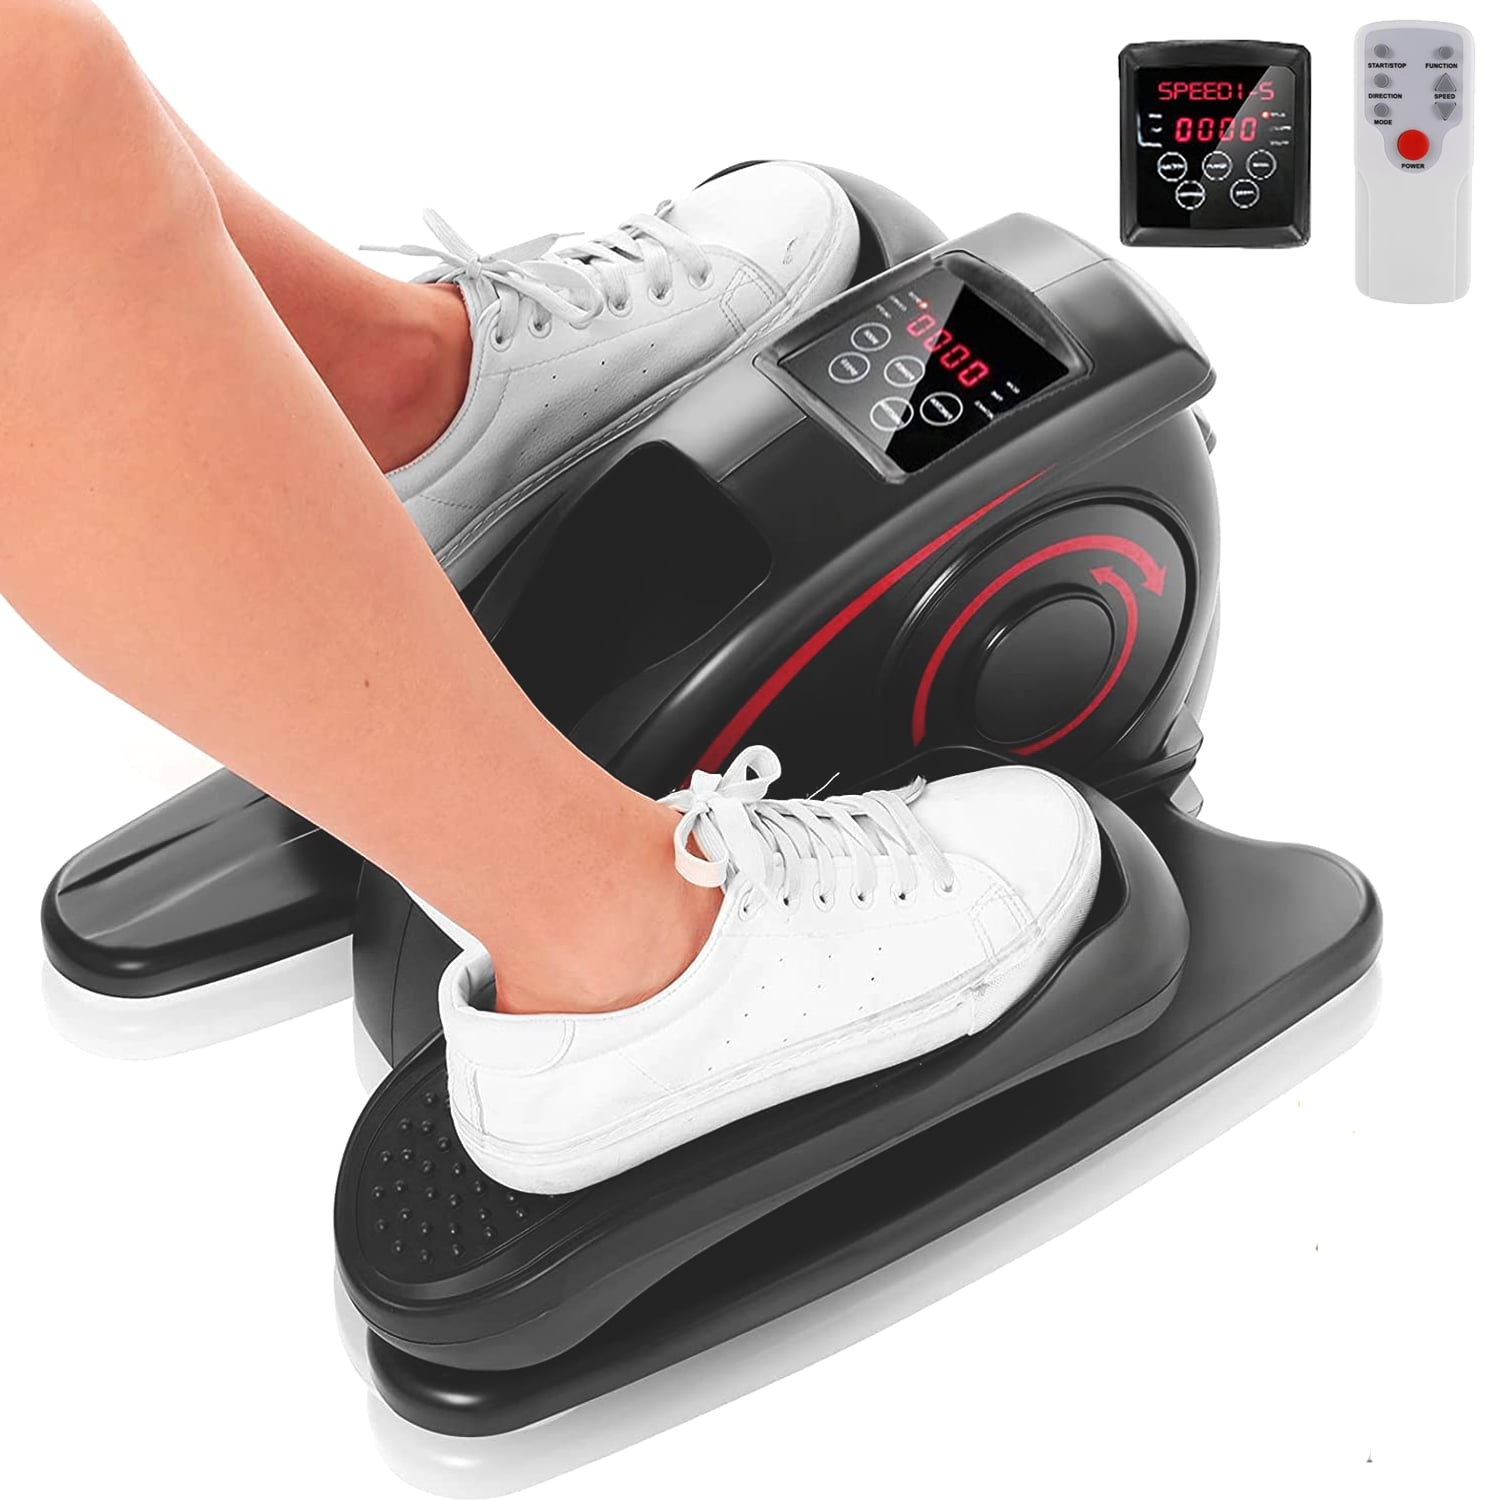 ANCHEER Pedal Exerciser Under Desk Bike for Leg and Arm Exercise LCD Monitor NEW 